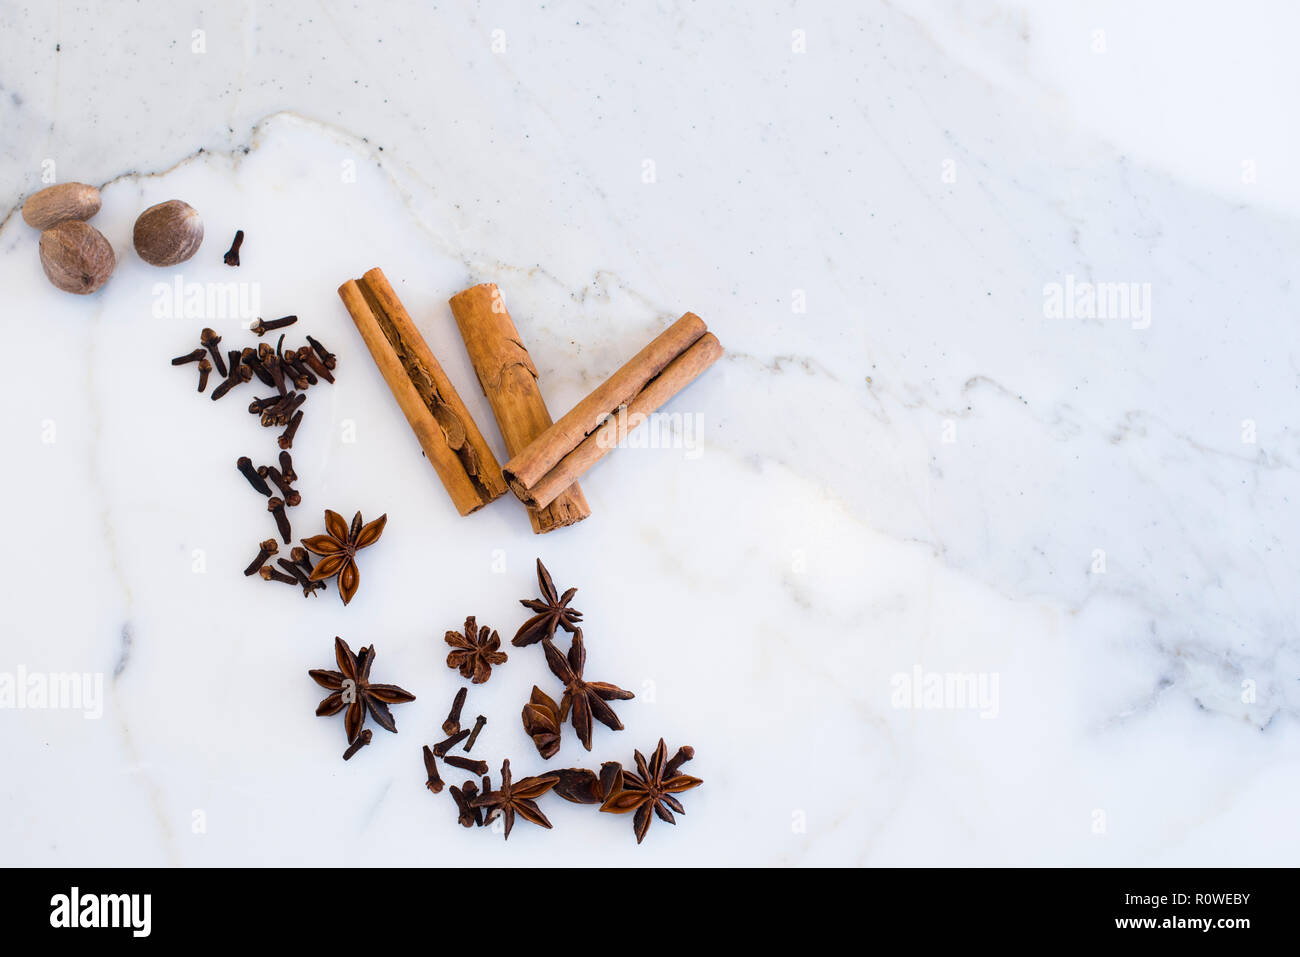 Variety of spices including cinnamon, nutmeg, cloves and star anise on calacatta marble kitchen countertop, top view Stock Photo